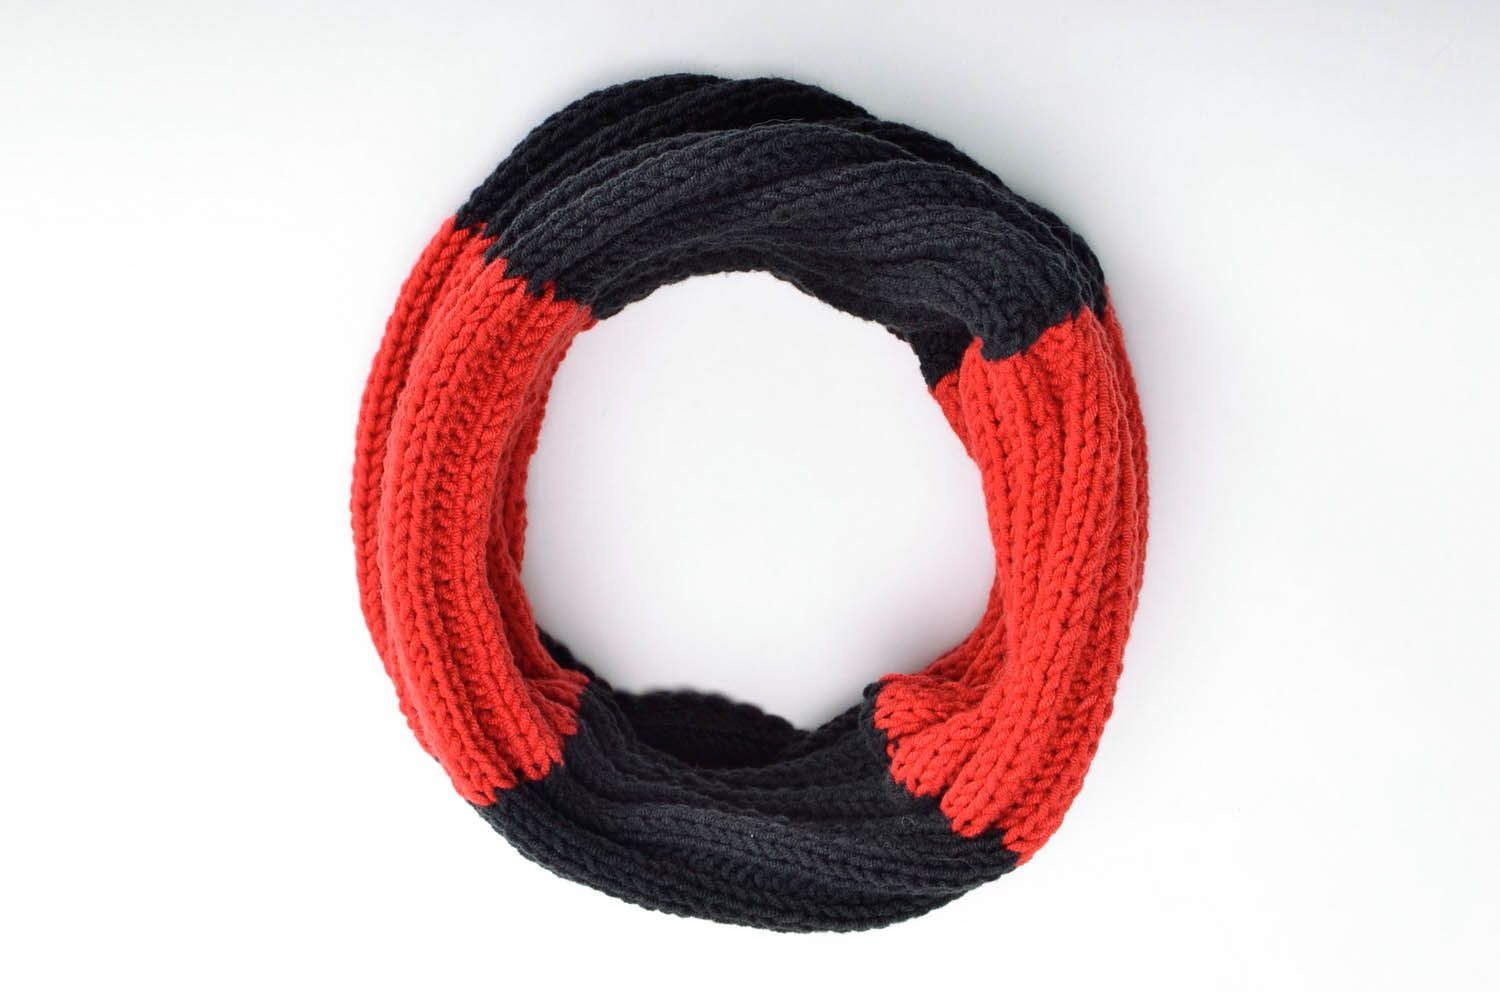 Knitted cowl photo 4